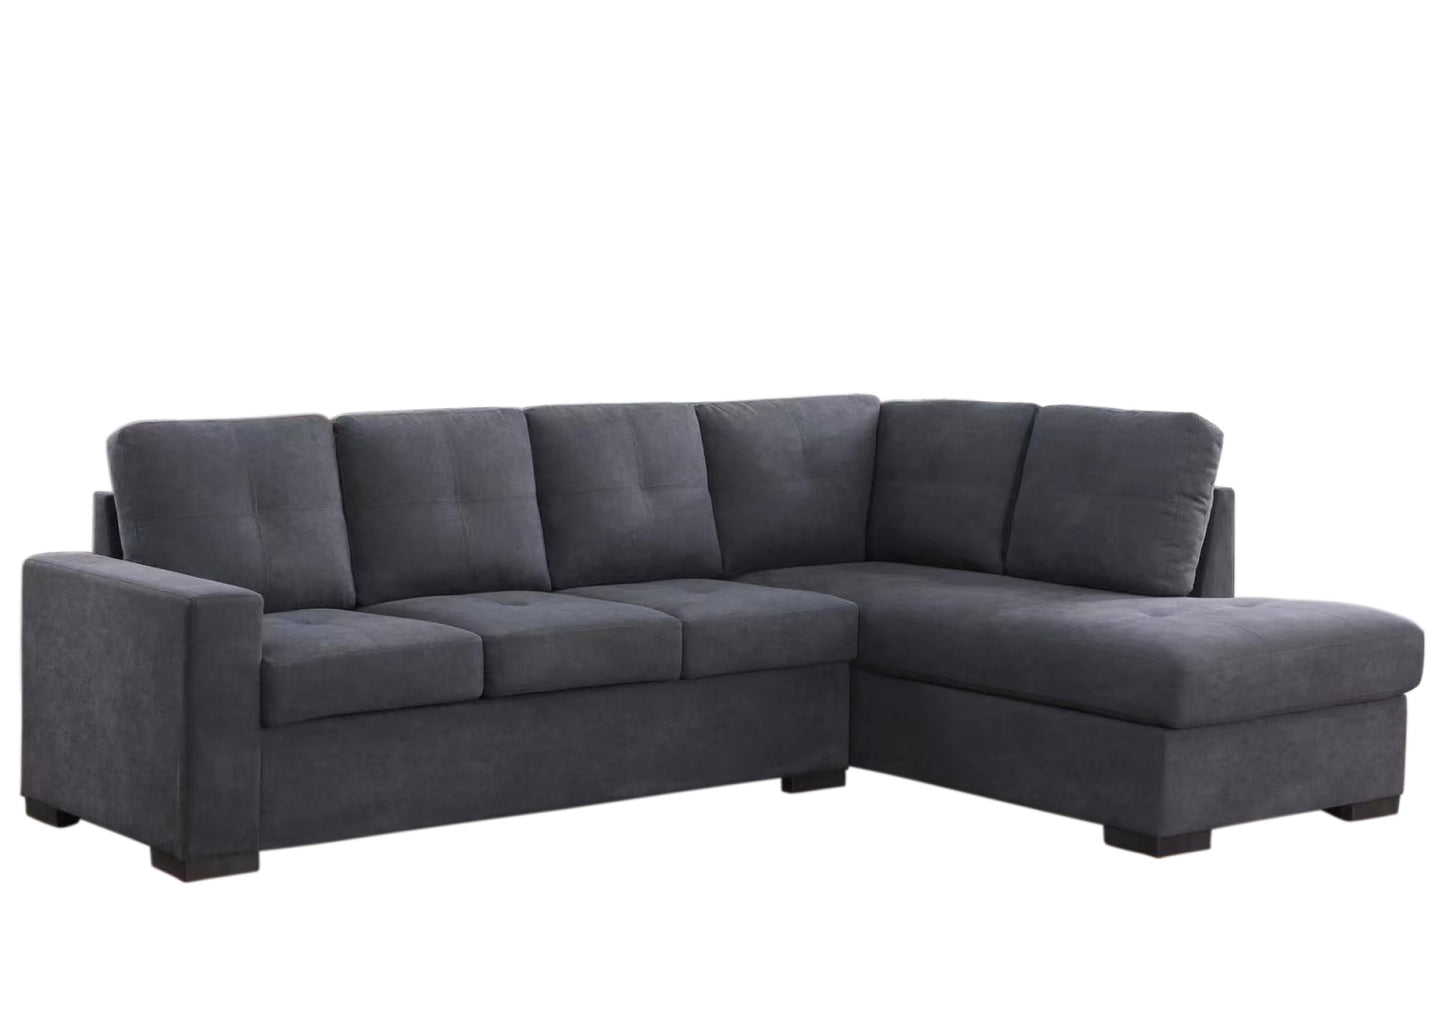 Prime Sofabed with Chaise